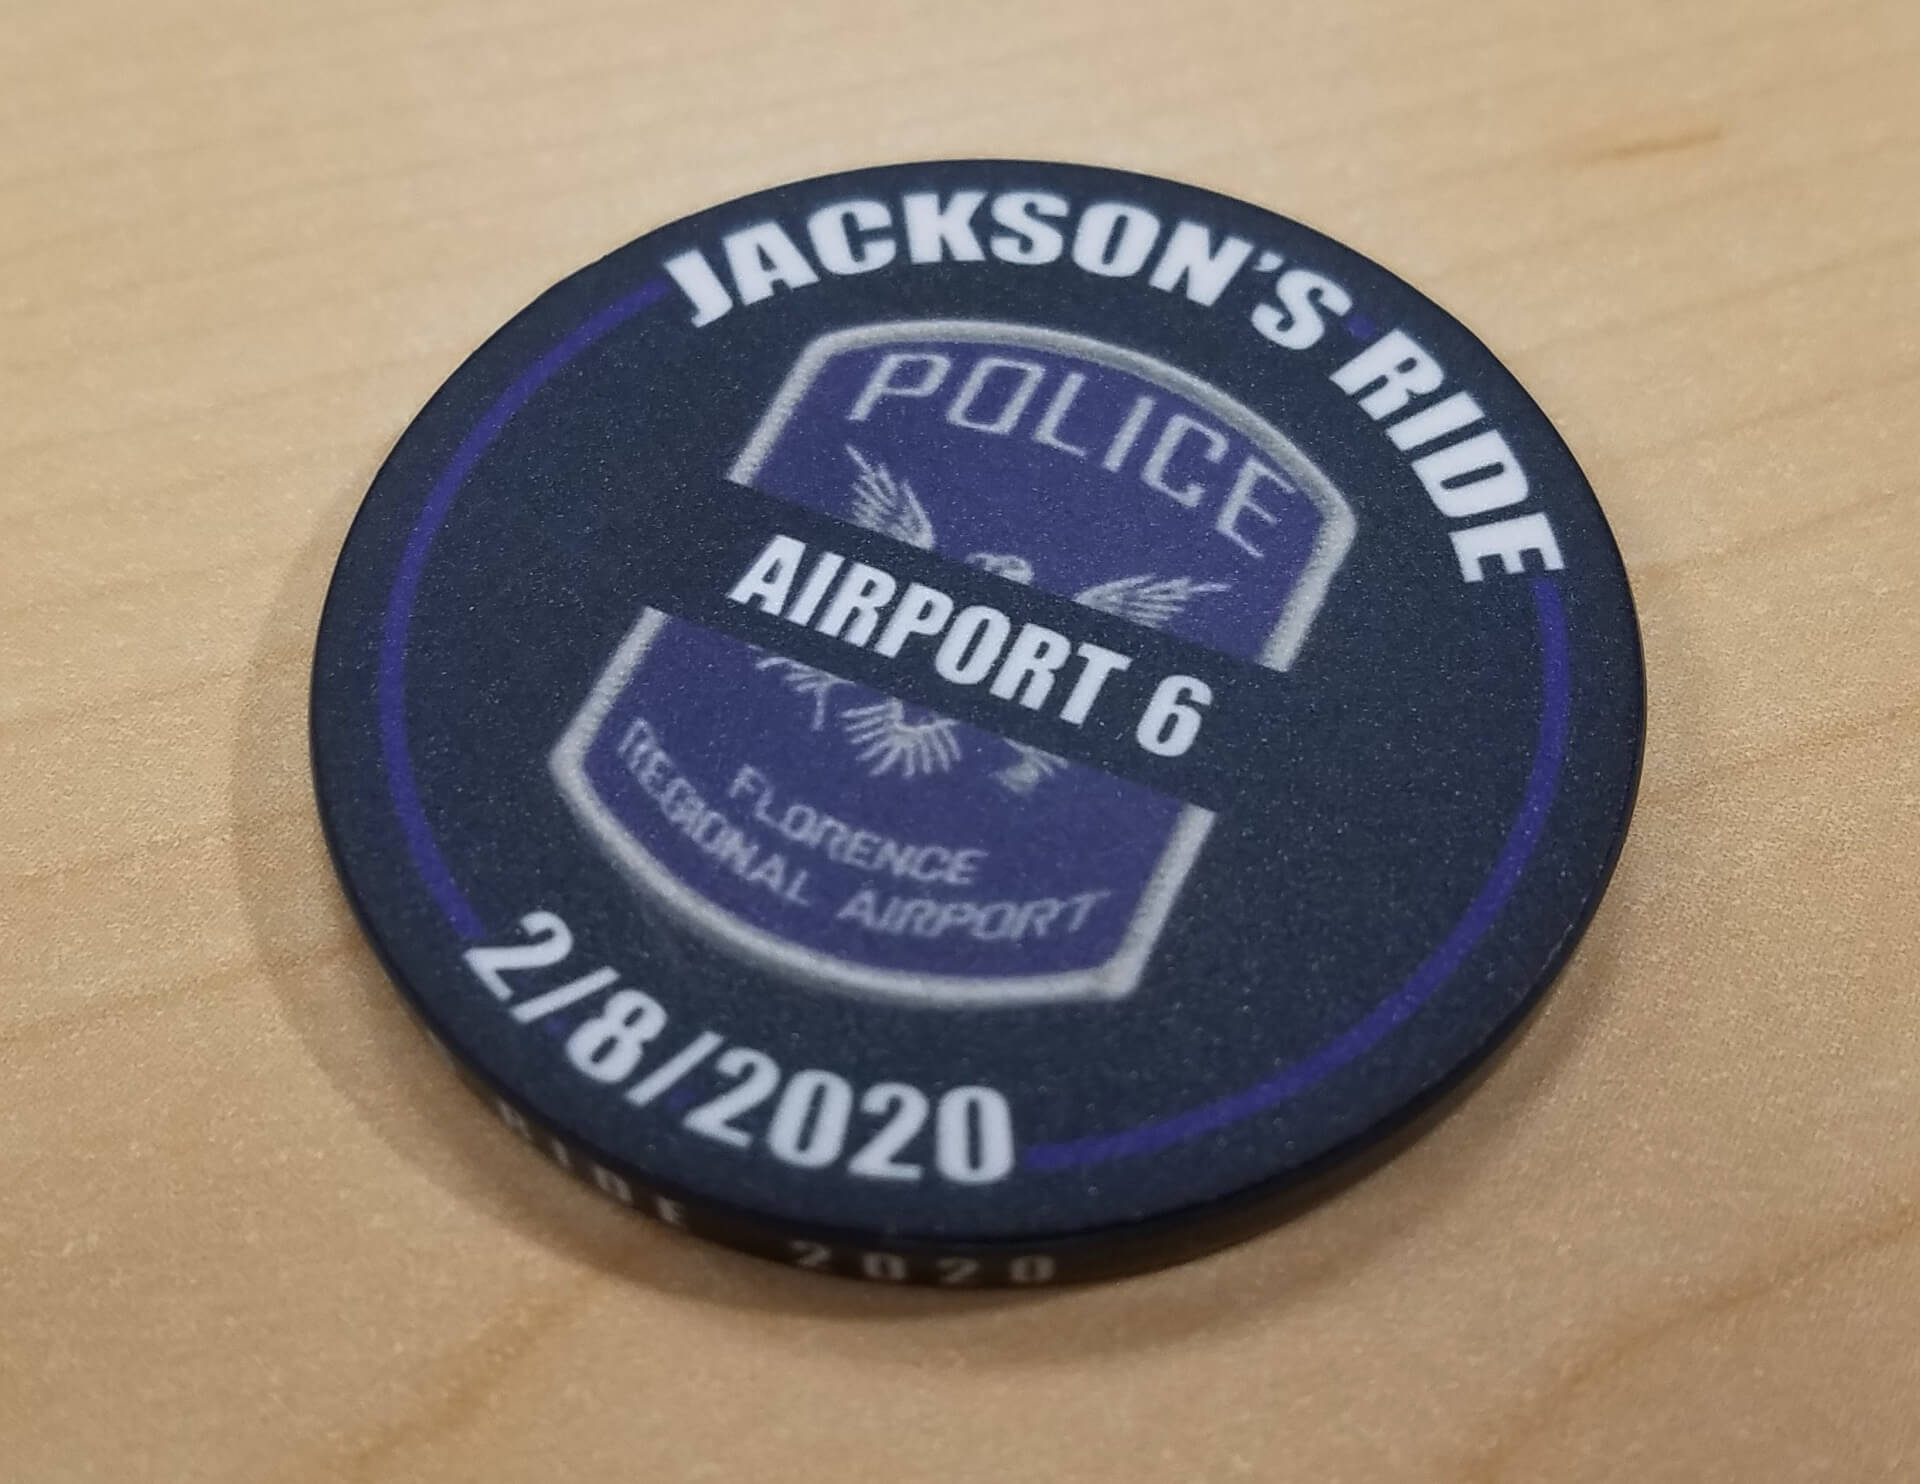 Aurora Poker Gear Custom Challenge Coins for Client - Jackson's Ride 2020 - Officer Down Patriotic Chips - Set of patriotic ceramic challenge coins customized by Aurora Poker Gear to commemorate the annual Jackson's Ride 2020 event, featuring police-related graphics with black band to honor fallen officers.